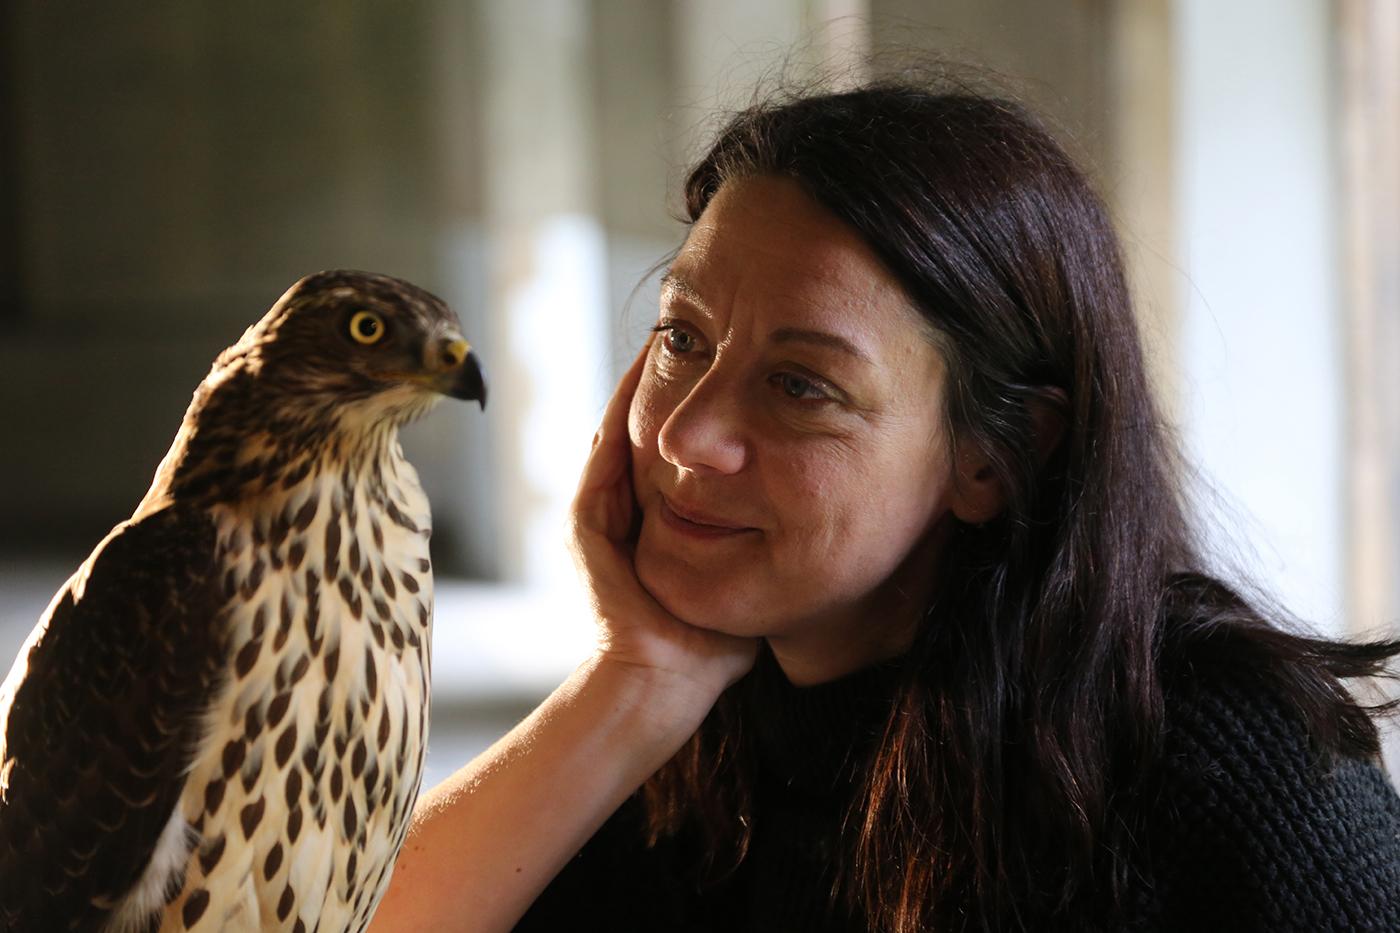 Helen Macdonald, author of H is for Hawk, with her goshawk Lupin. Photo: Courtesy Mike Birkhead Associates